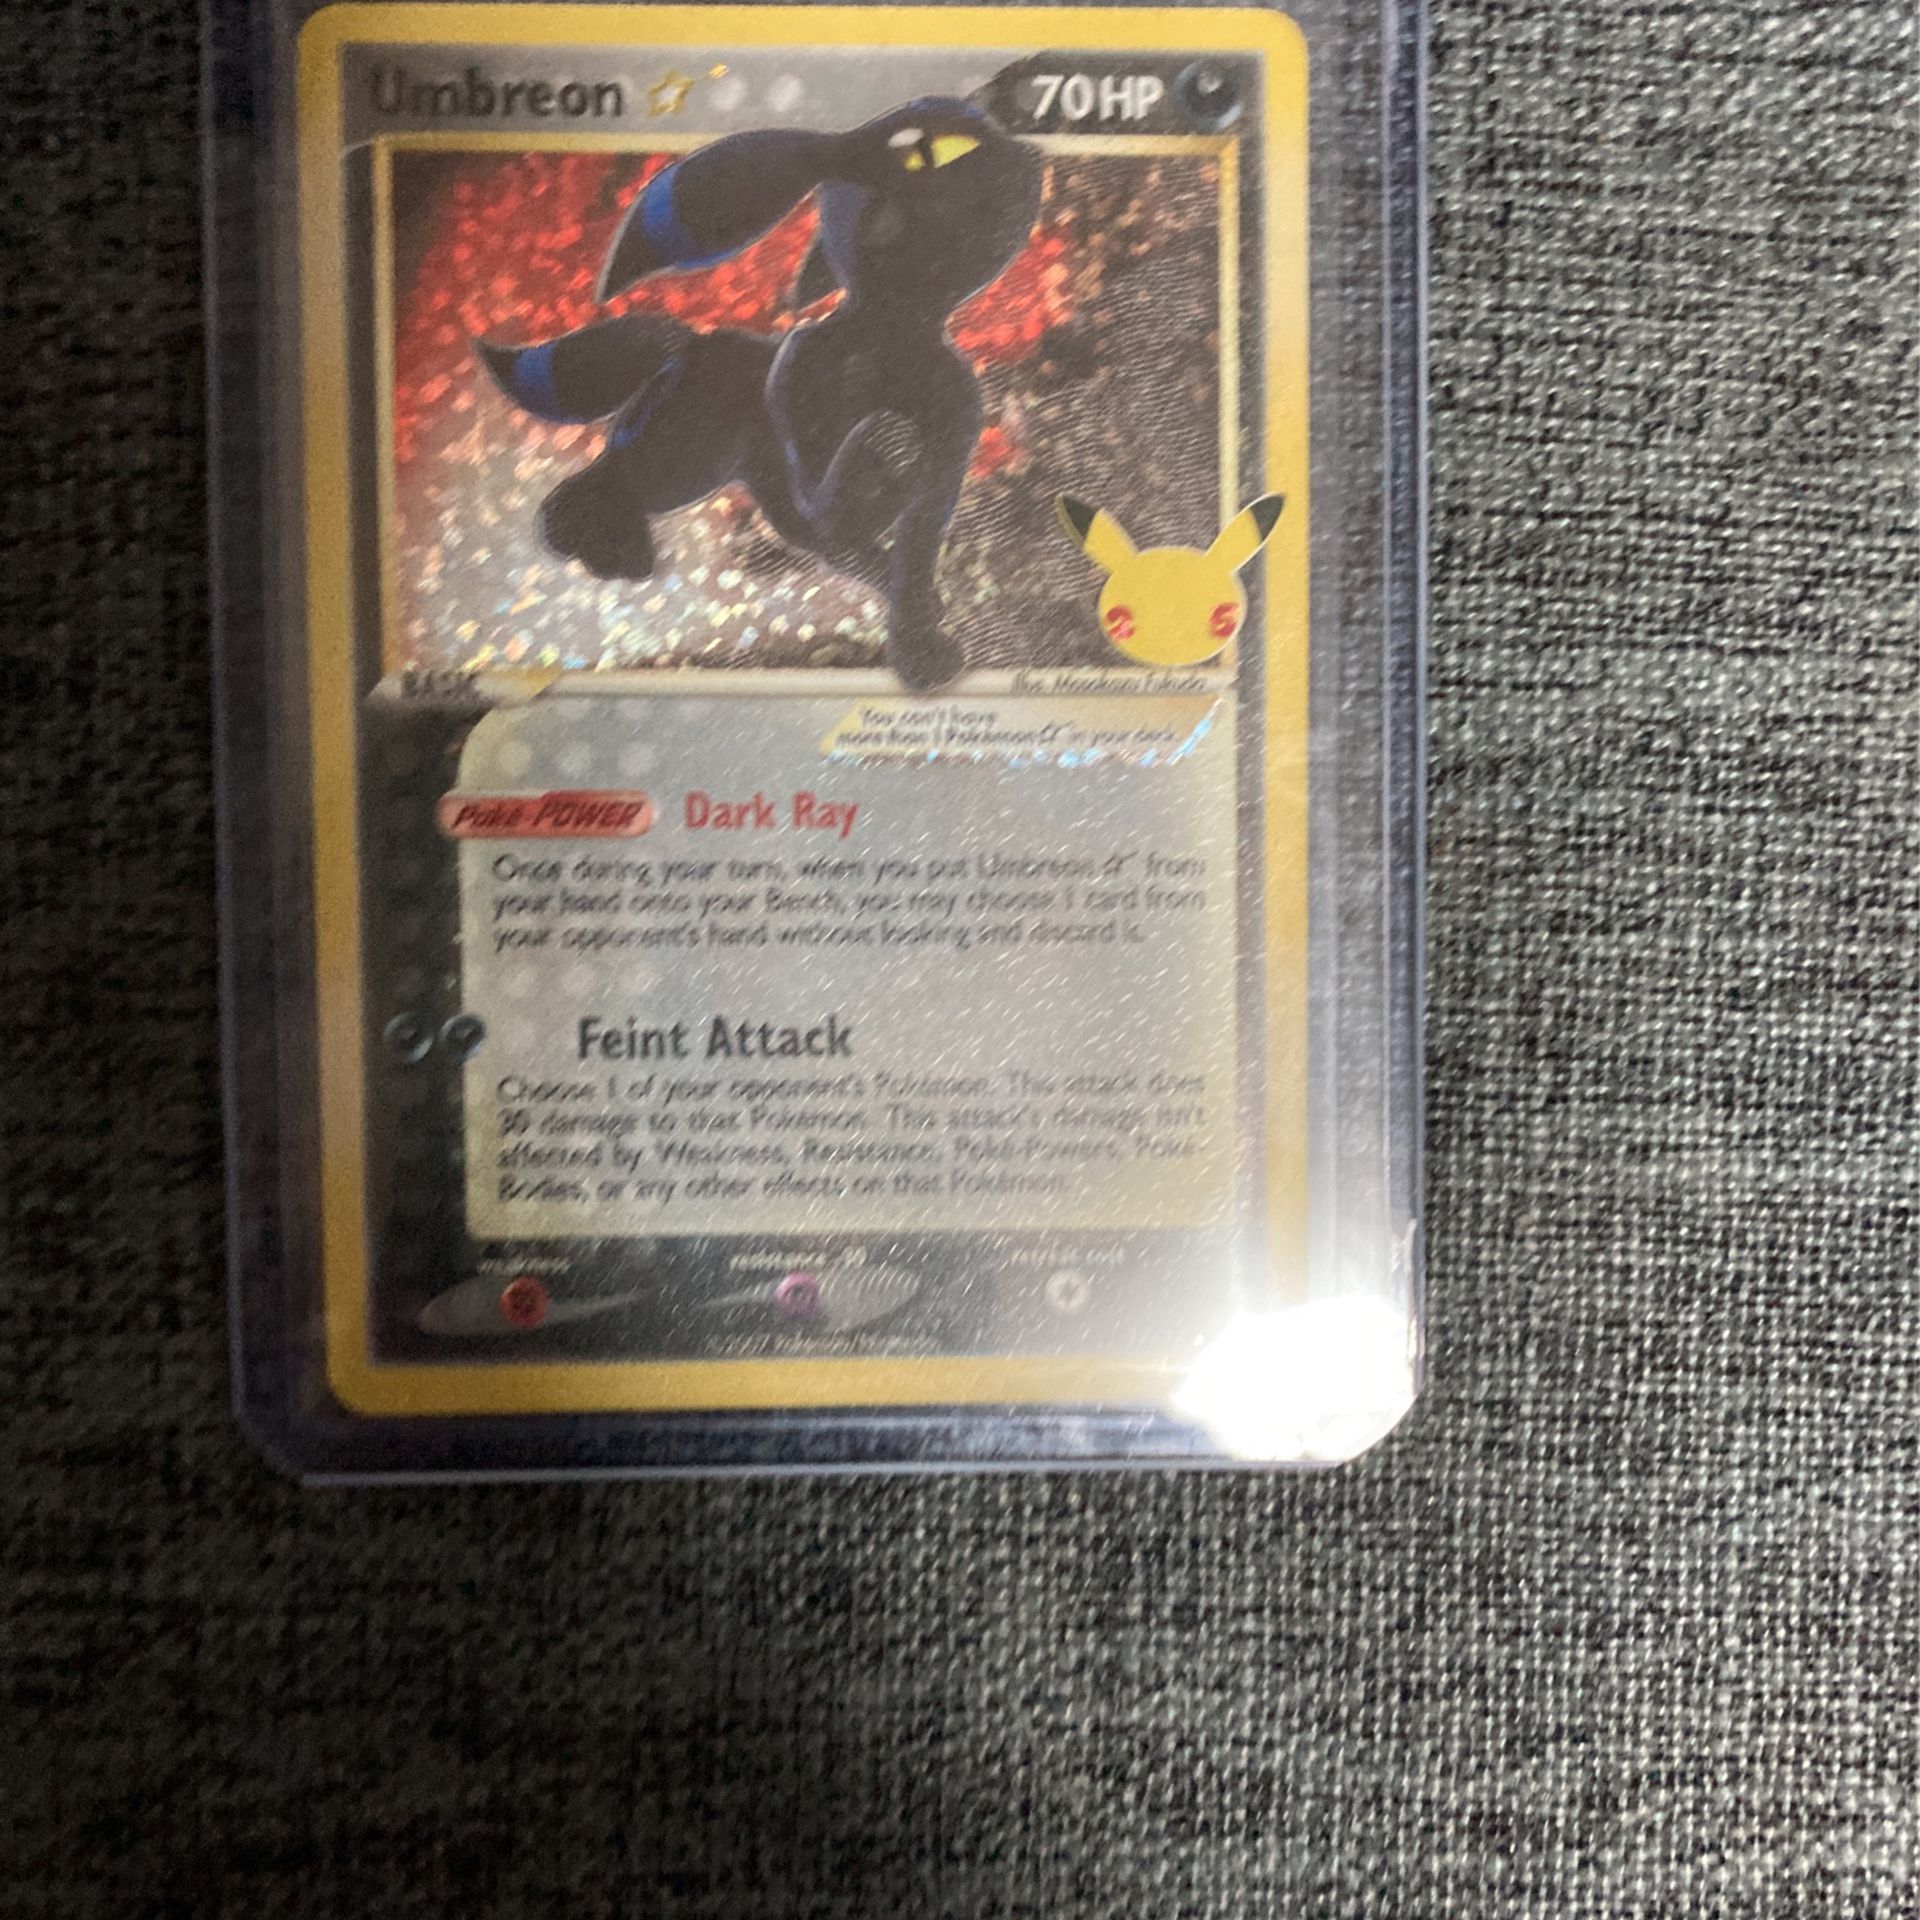  Gold Star Umbreon Celebration We Take Bids Offers And Trades